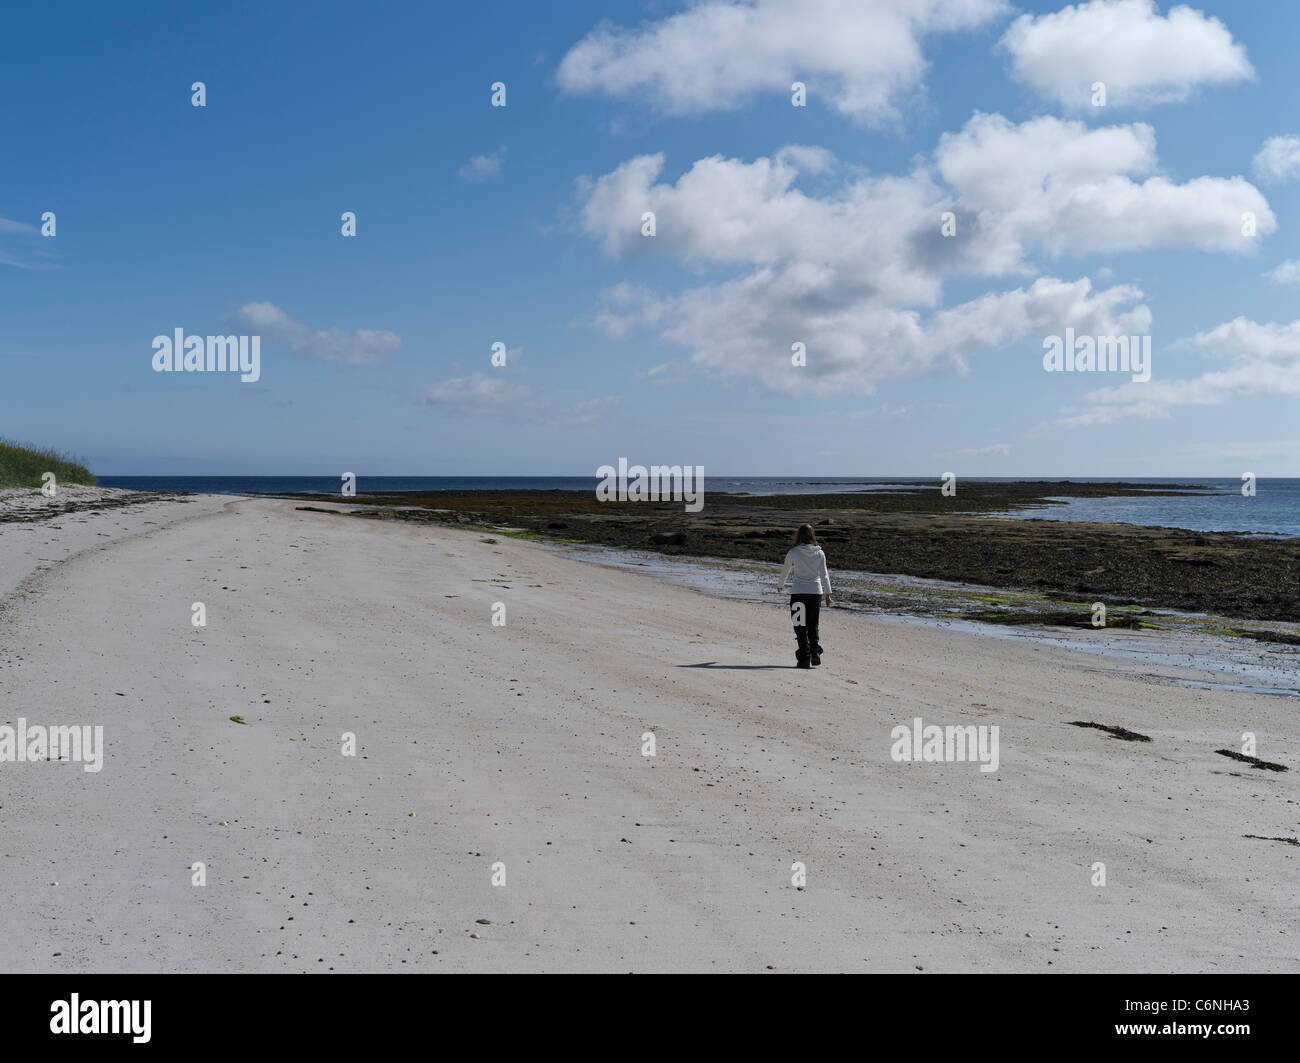 dh South Wick PAPA WESTRAY ORKNEY Tourist person walking on white sand beach sandy woman alone silver uk islands Stock Photo